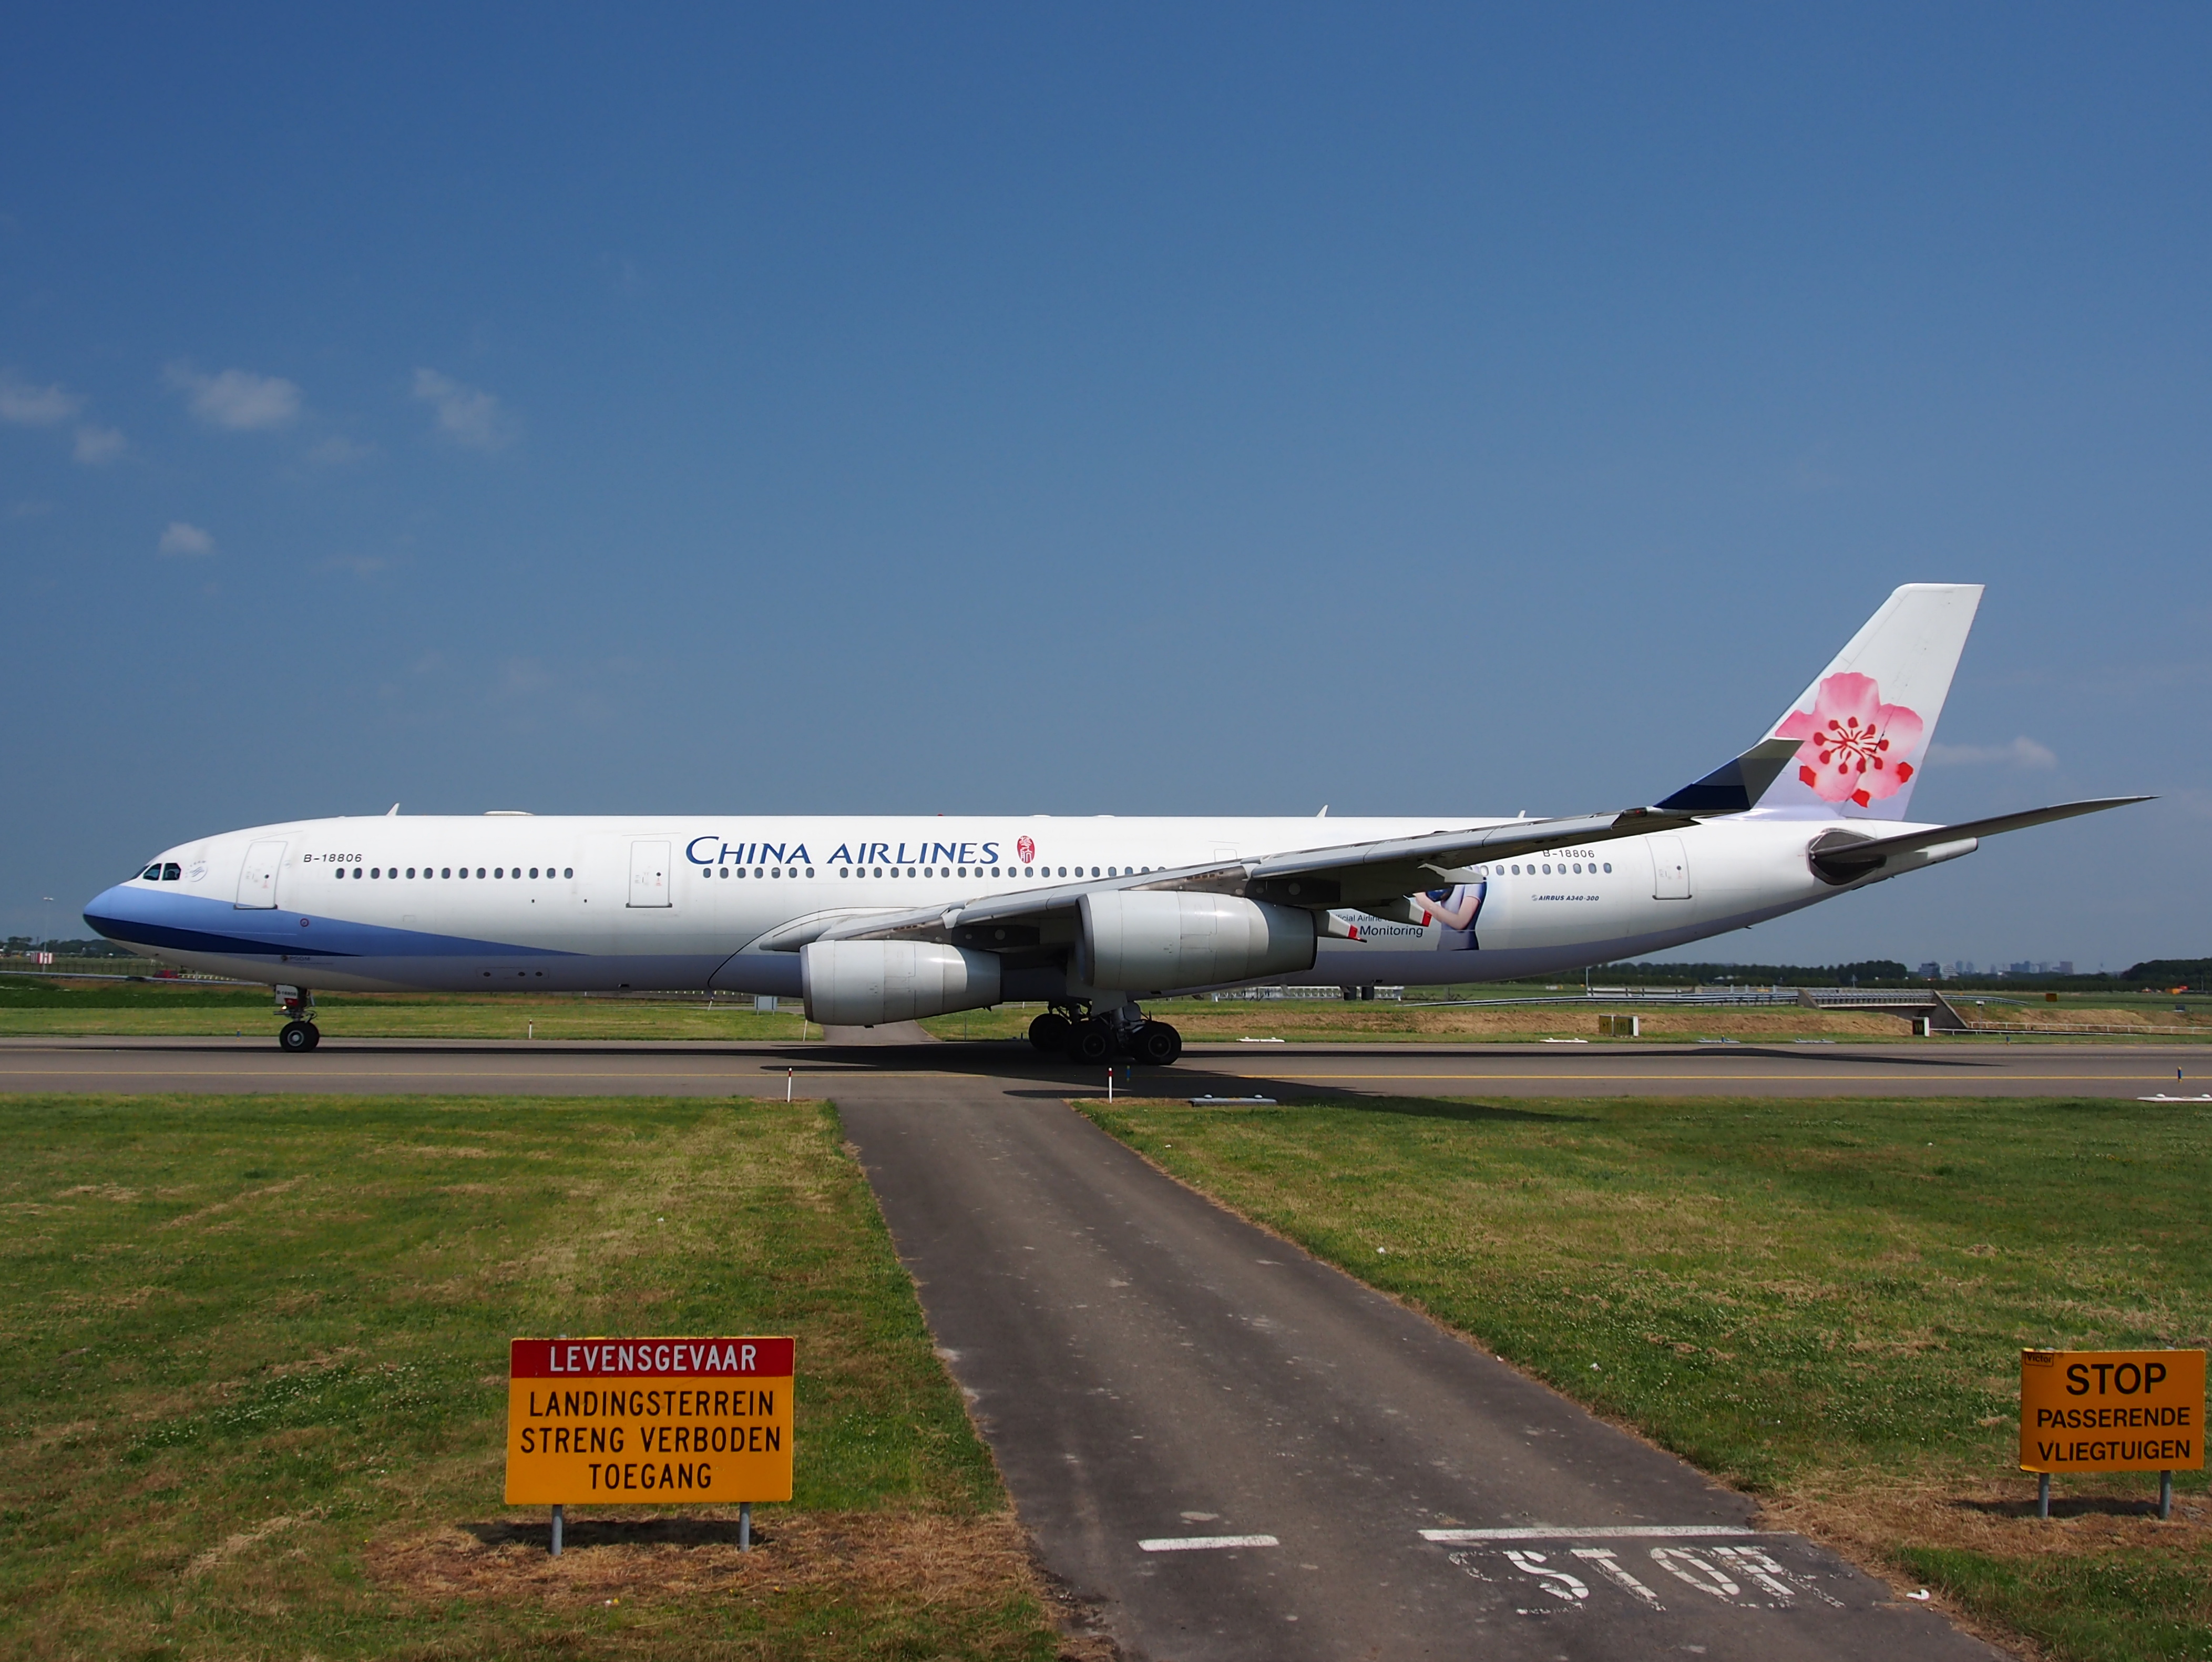 B-18806 China Airlines Airbus A340-313X - cn 433 pic4